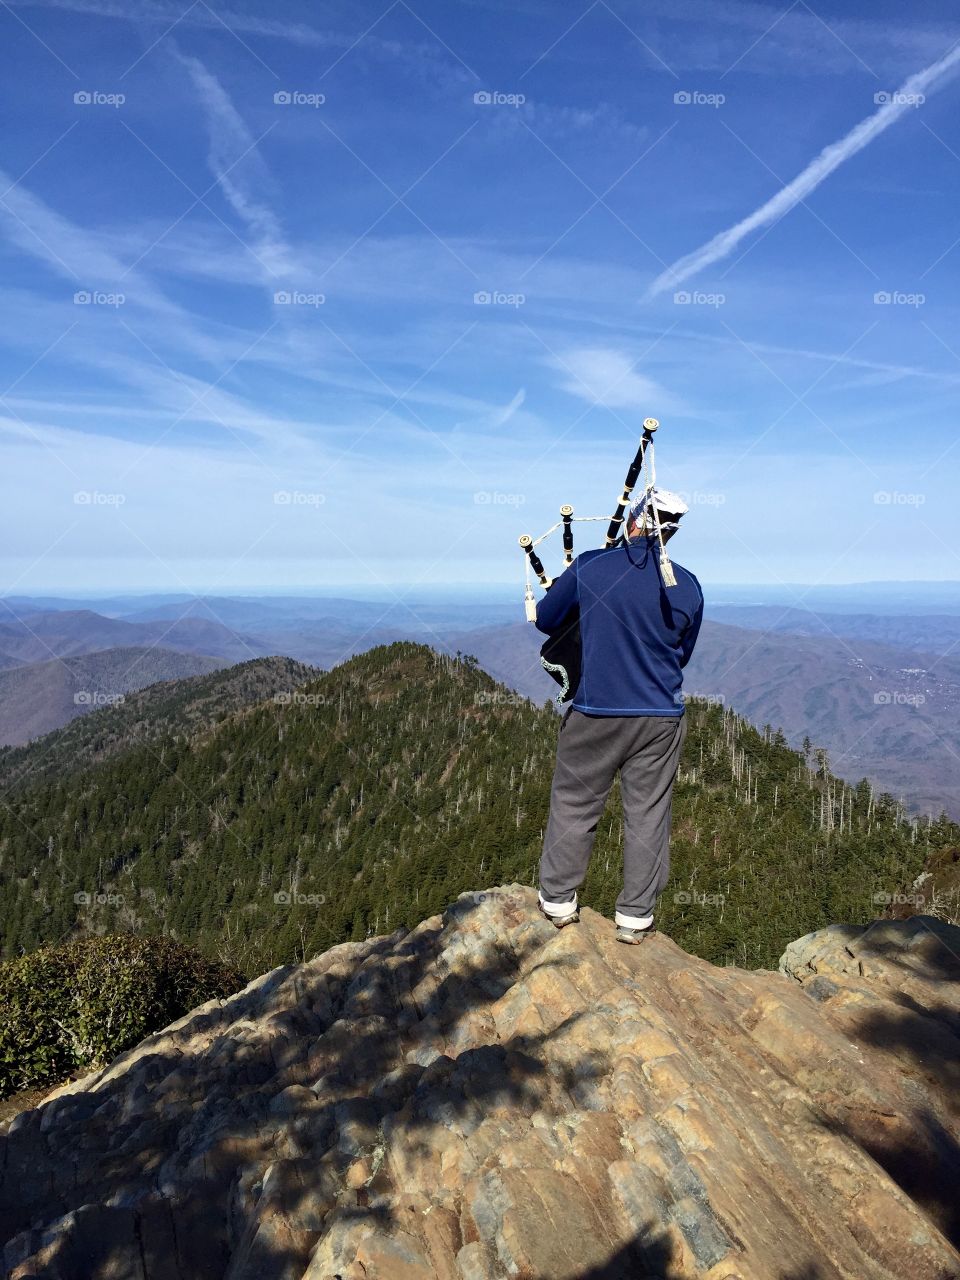 Bagpipes on the Mountain. Boy and his bagpipes on a mountain in TN